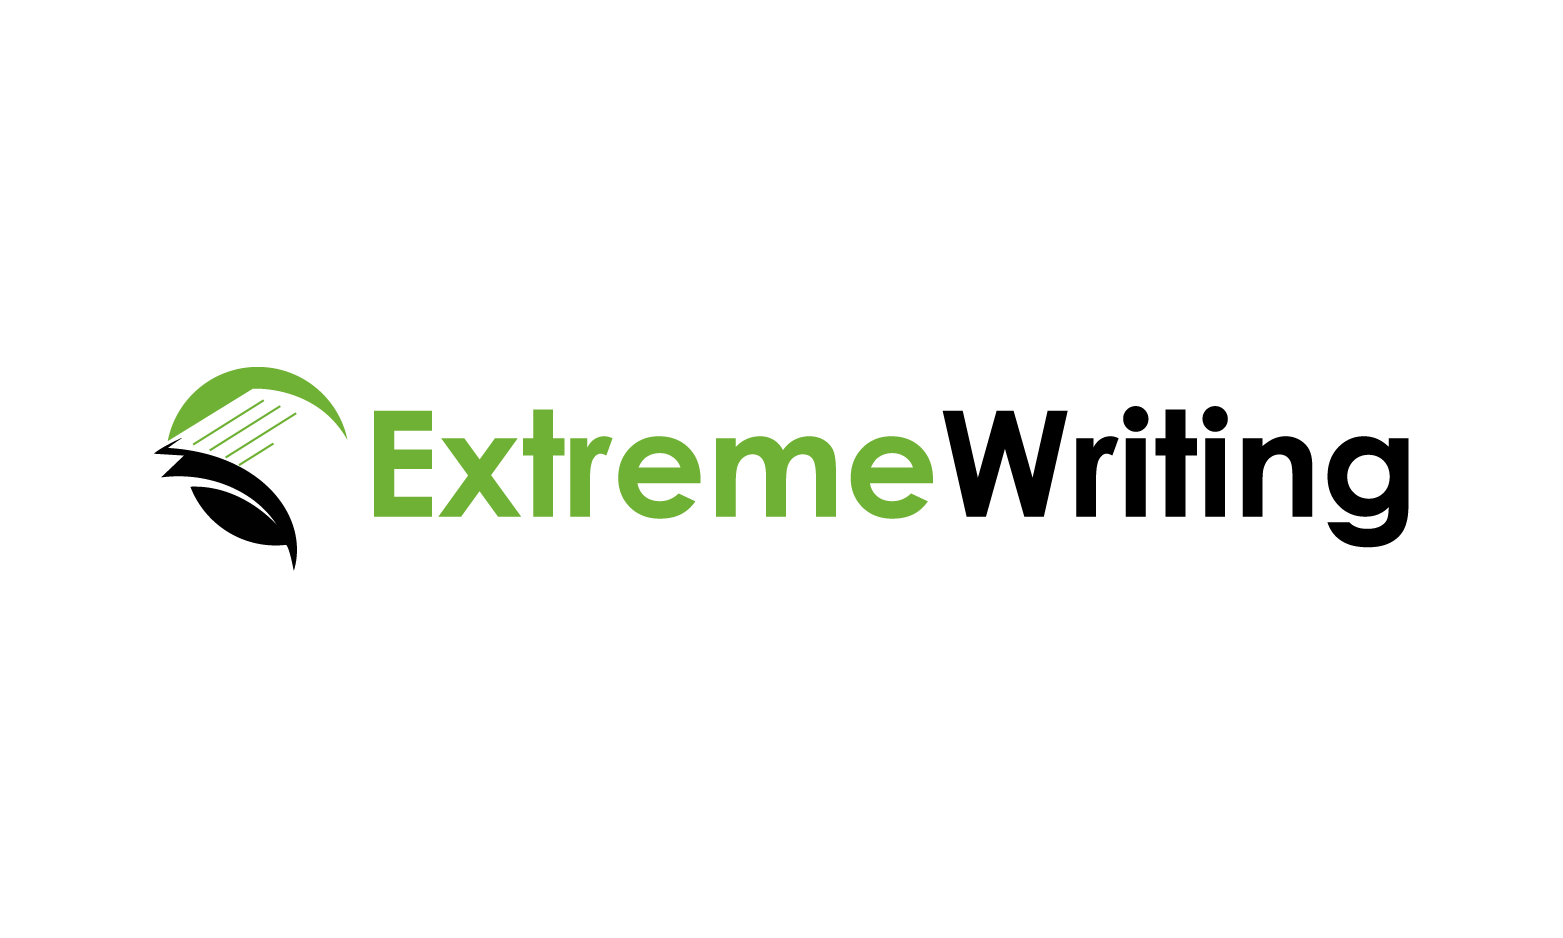 ExtremeWriting.com - Creative brandable domain for sale